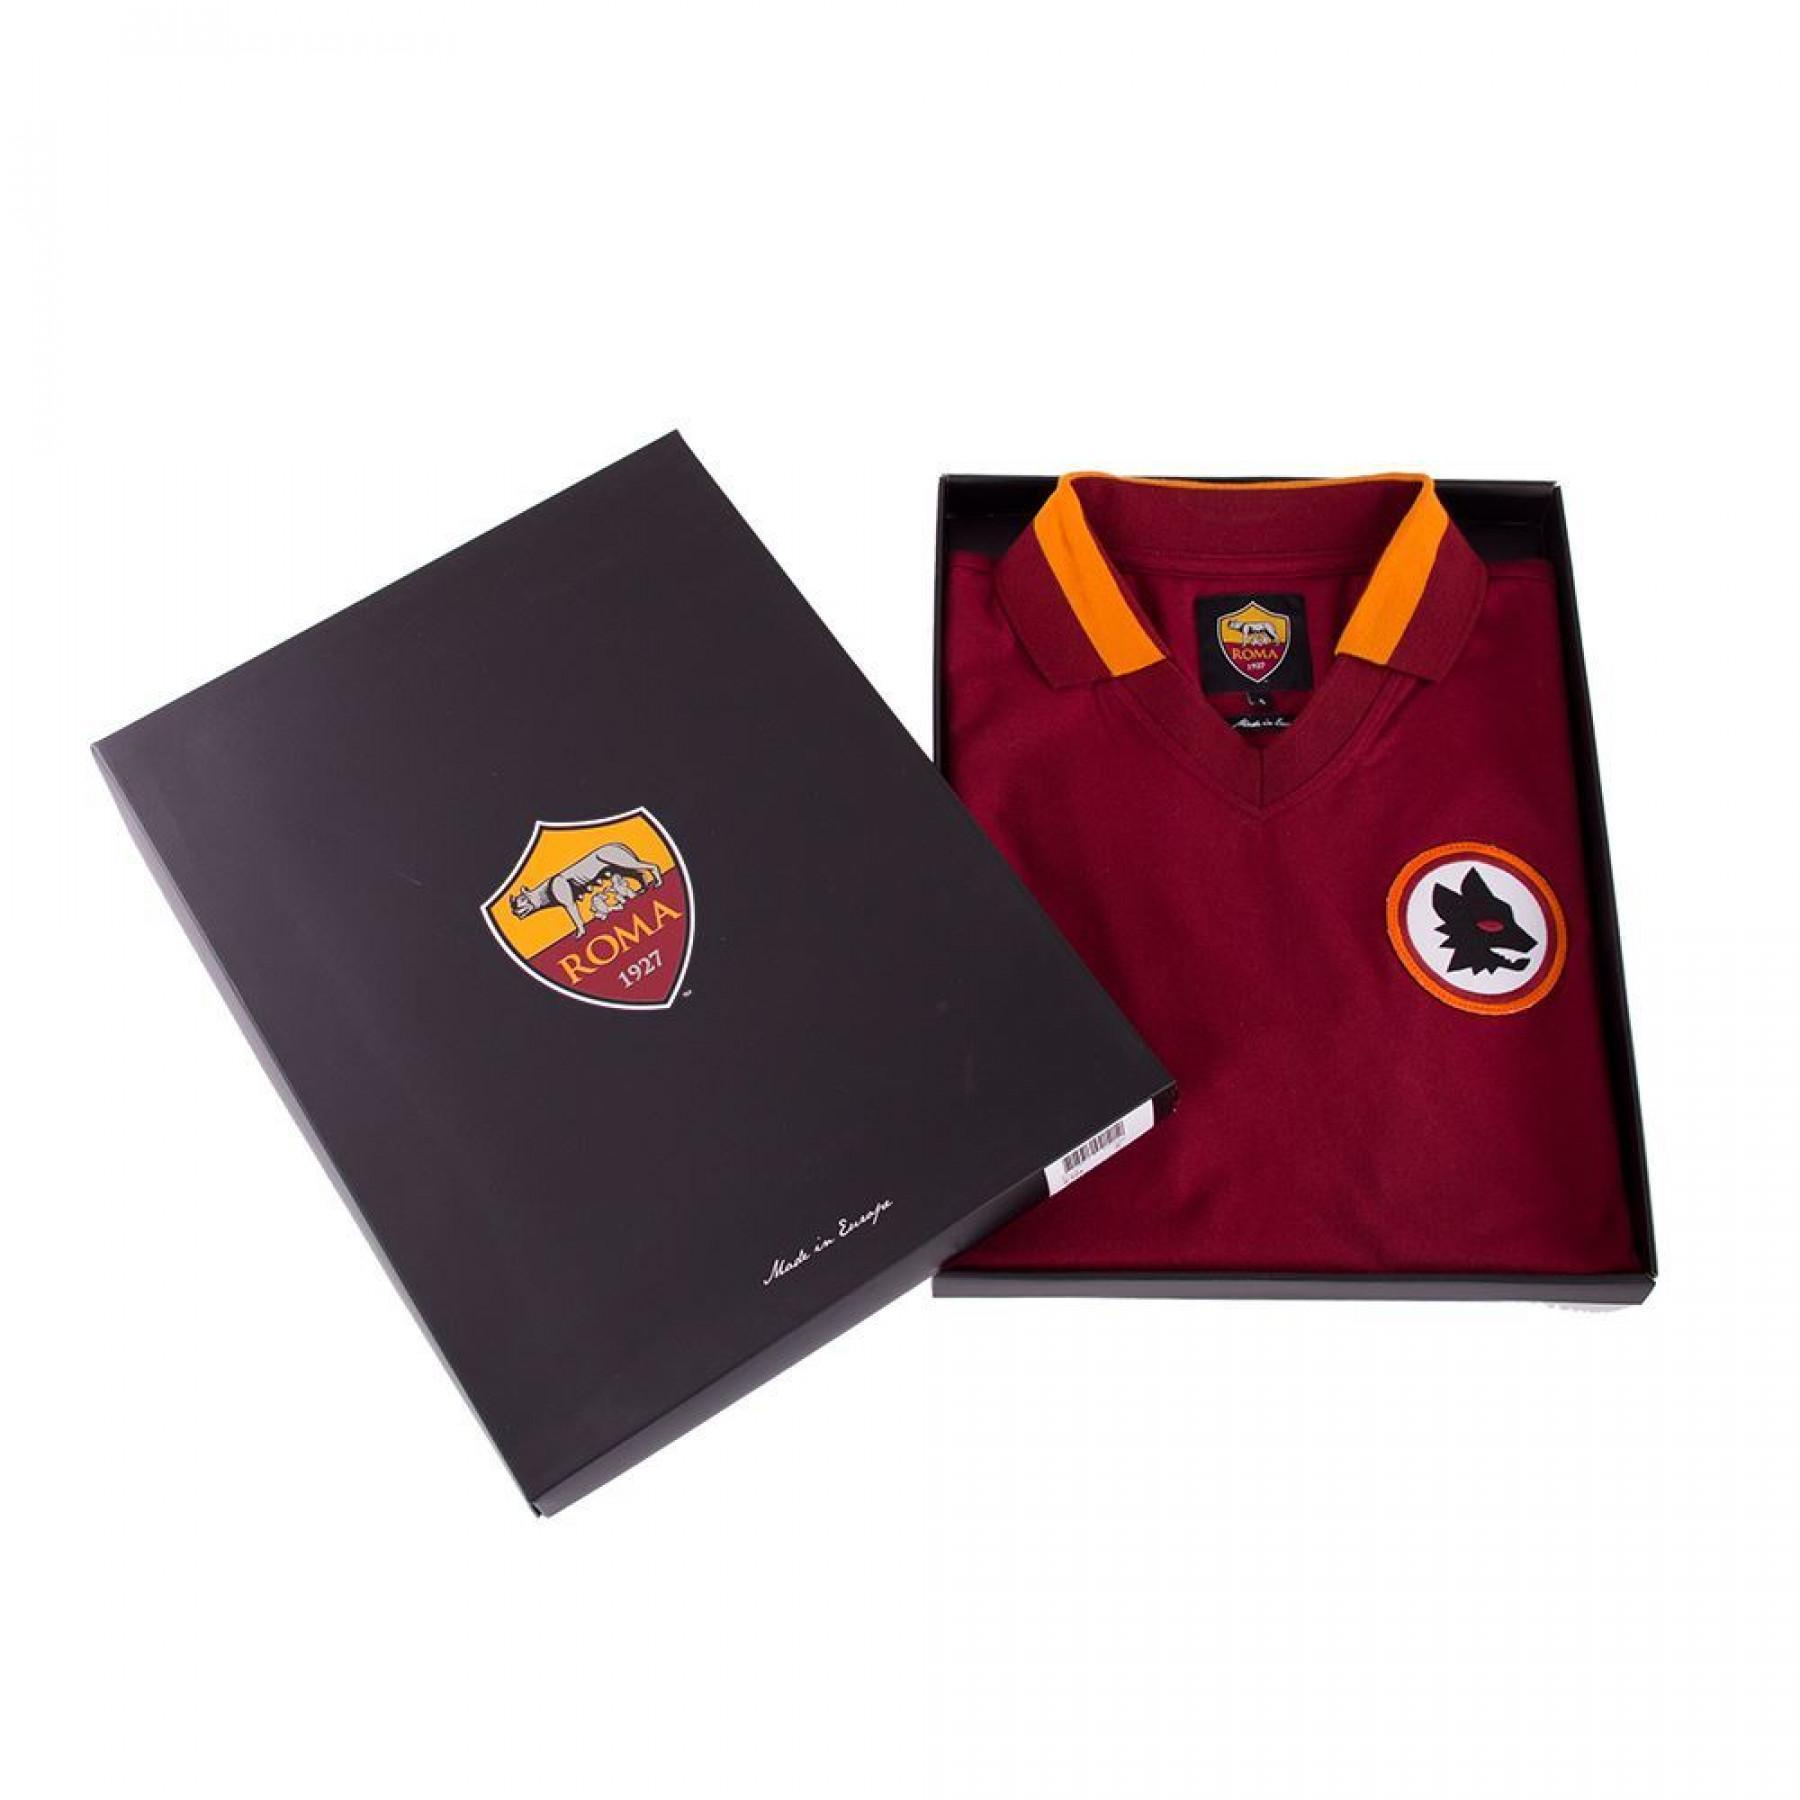 Home jersey AS Roma 1978/1979